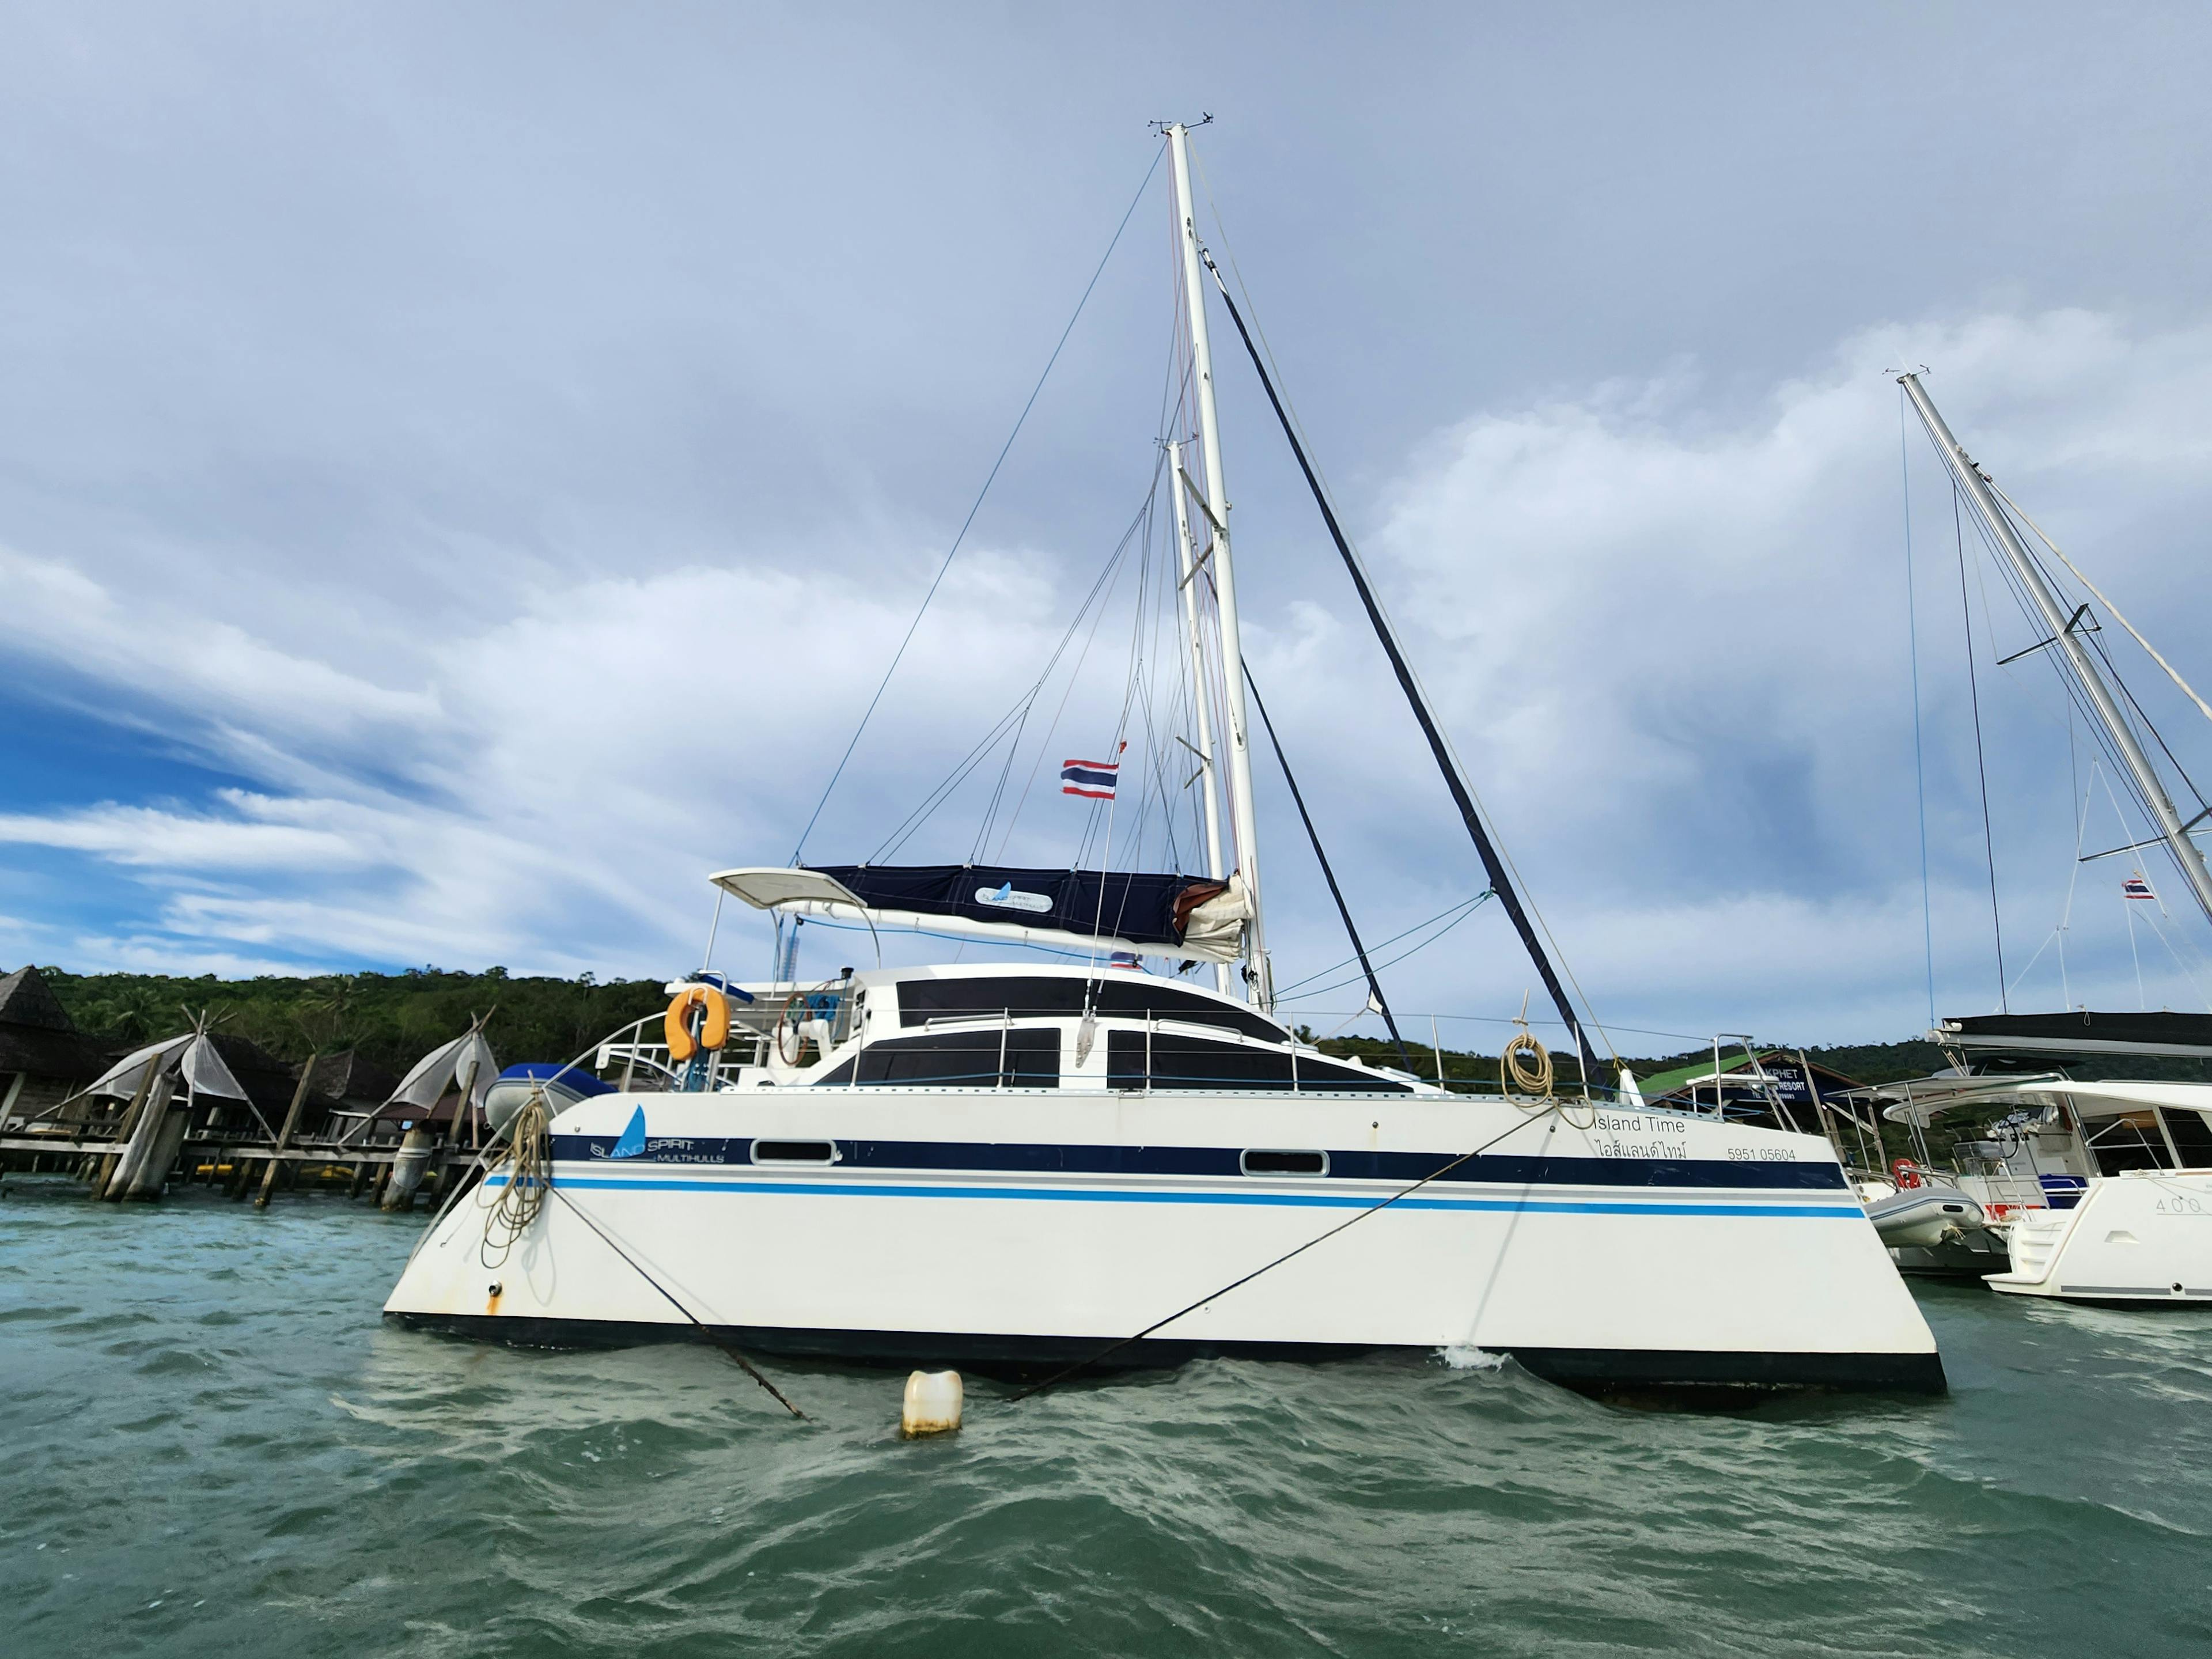 Book Island Spirit 38 - 4 cab. Catamaran for bareboat charter in Koh Chang, Ko Chang, Thailand  with TripYacht!, picture 1